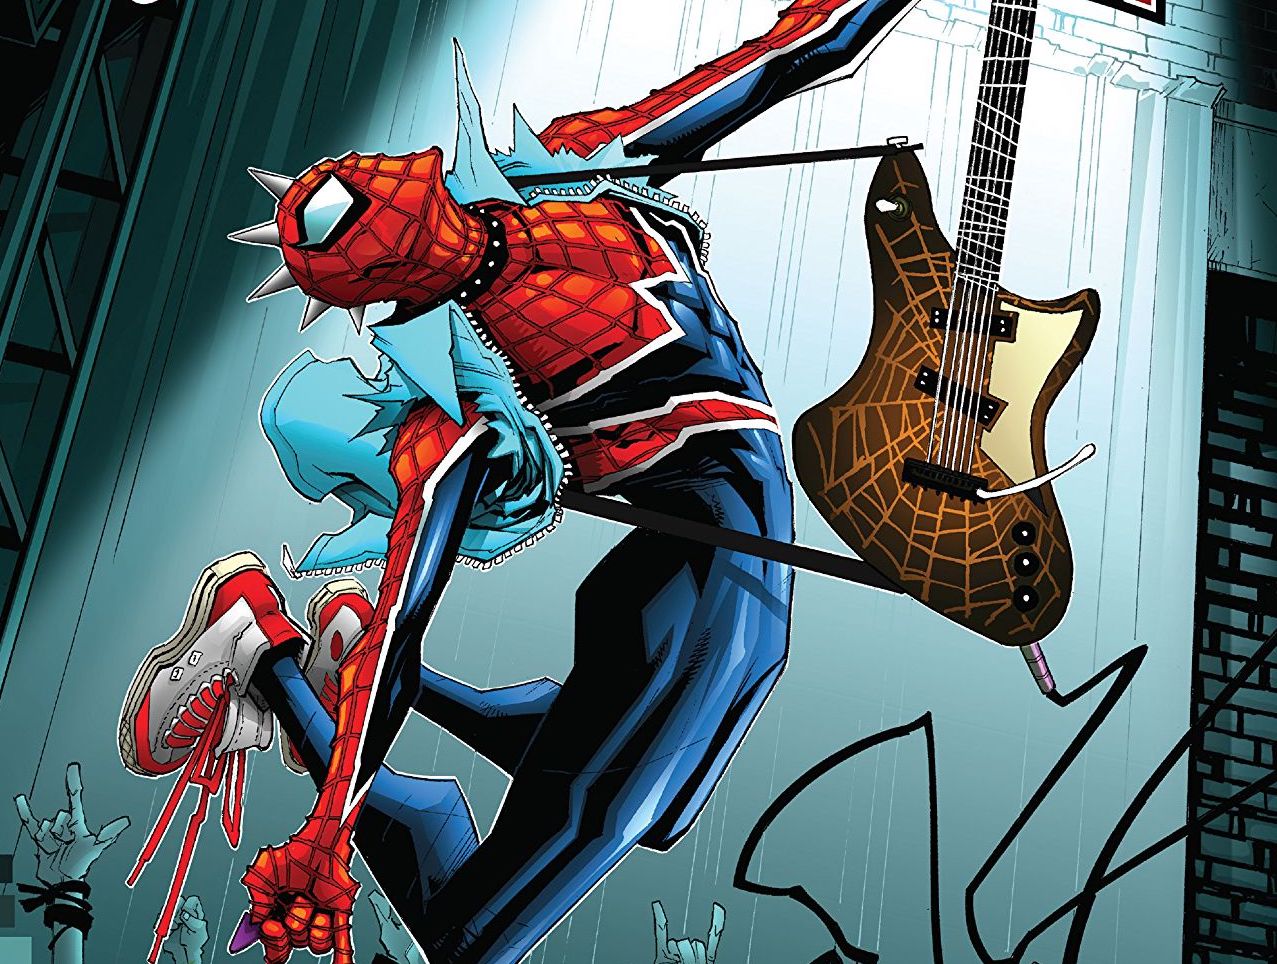 'Edge of Spider-Geddon' TPB review: A reminder of how deep the Spider-Man characters go